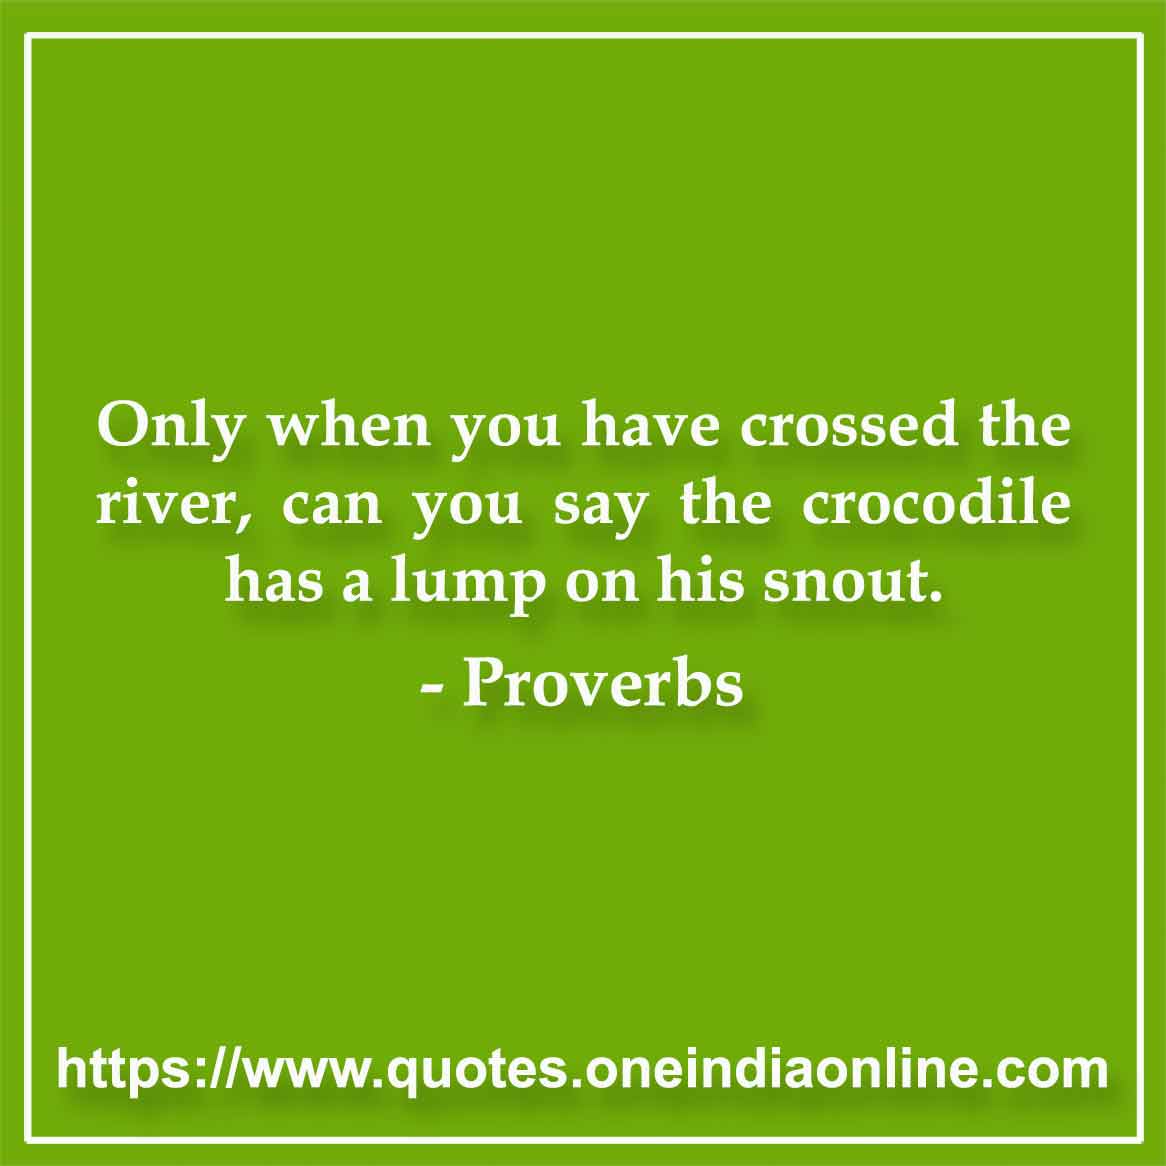 Only when you have crossed the river, can you say the crocodile has a lump on his snout.